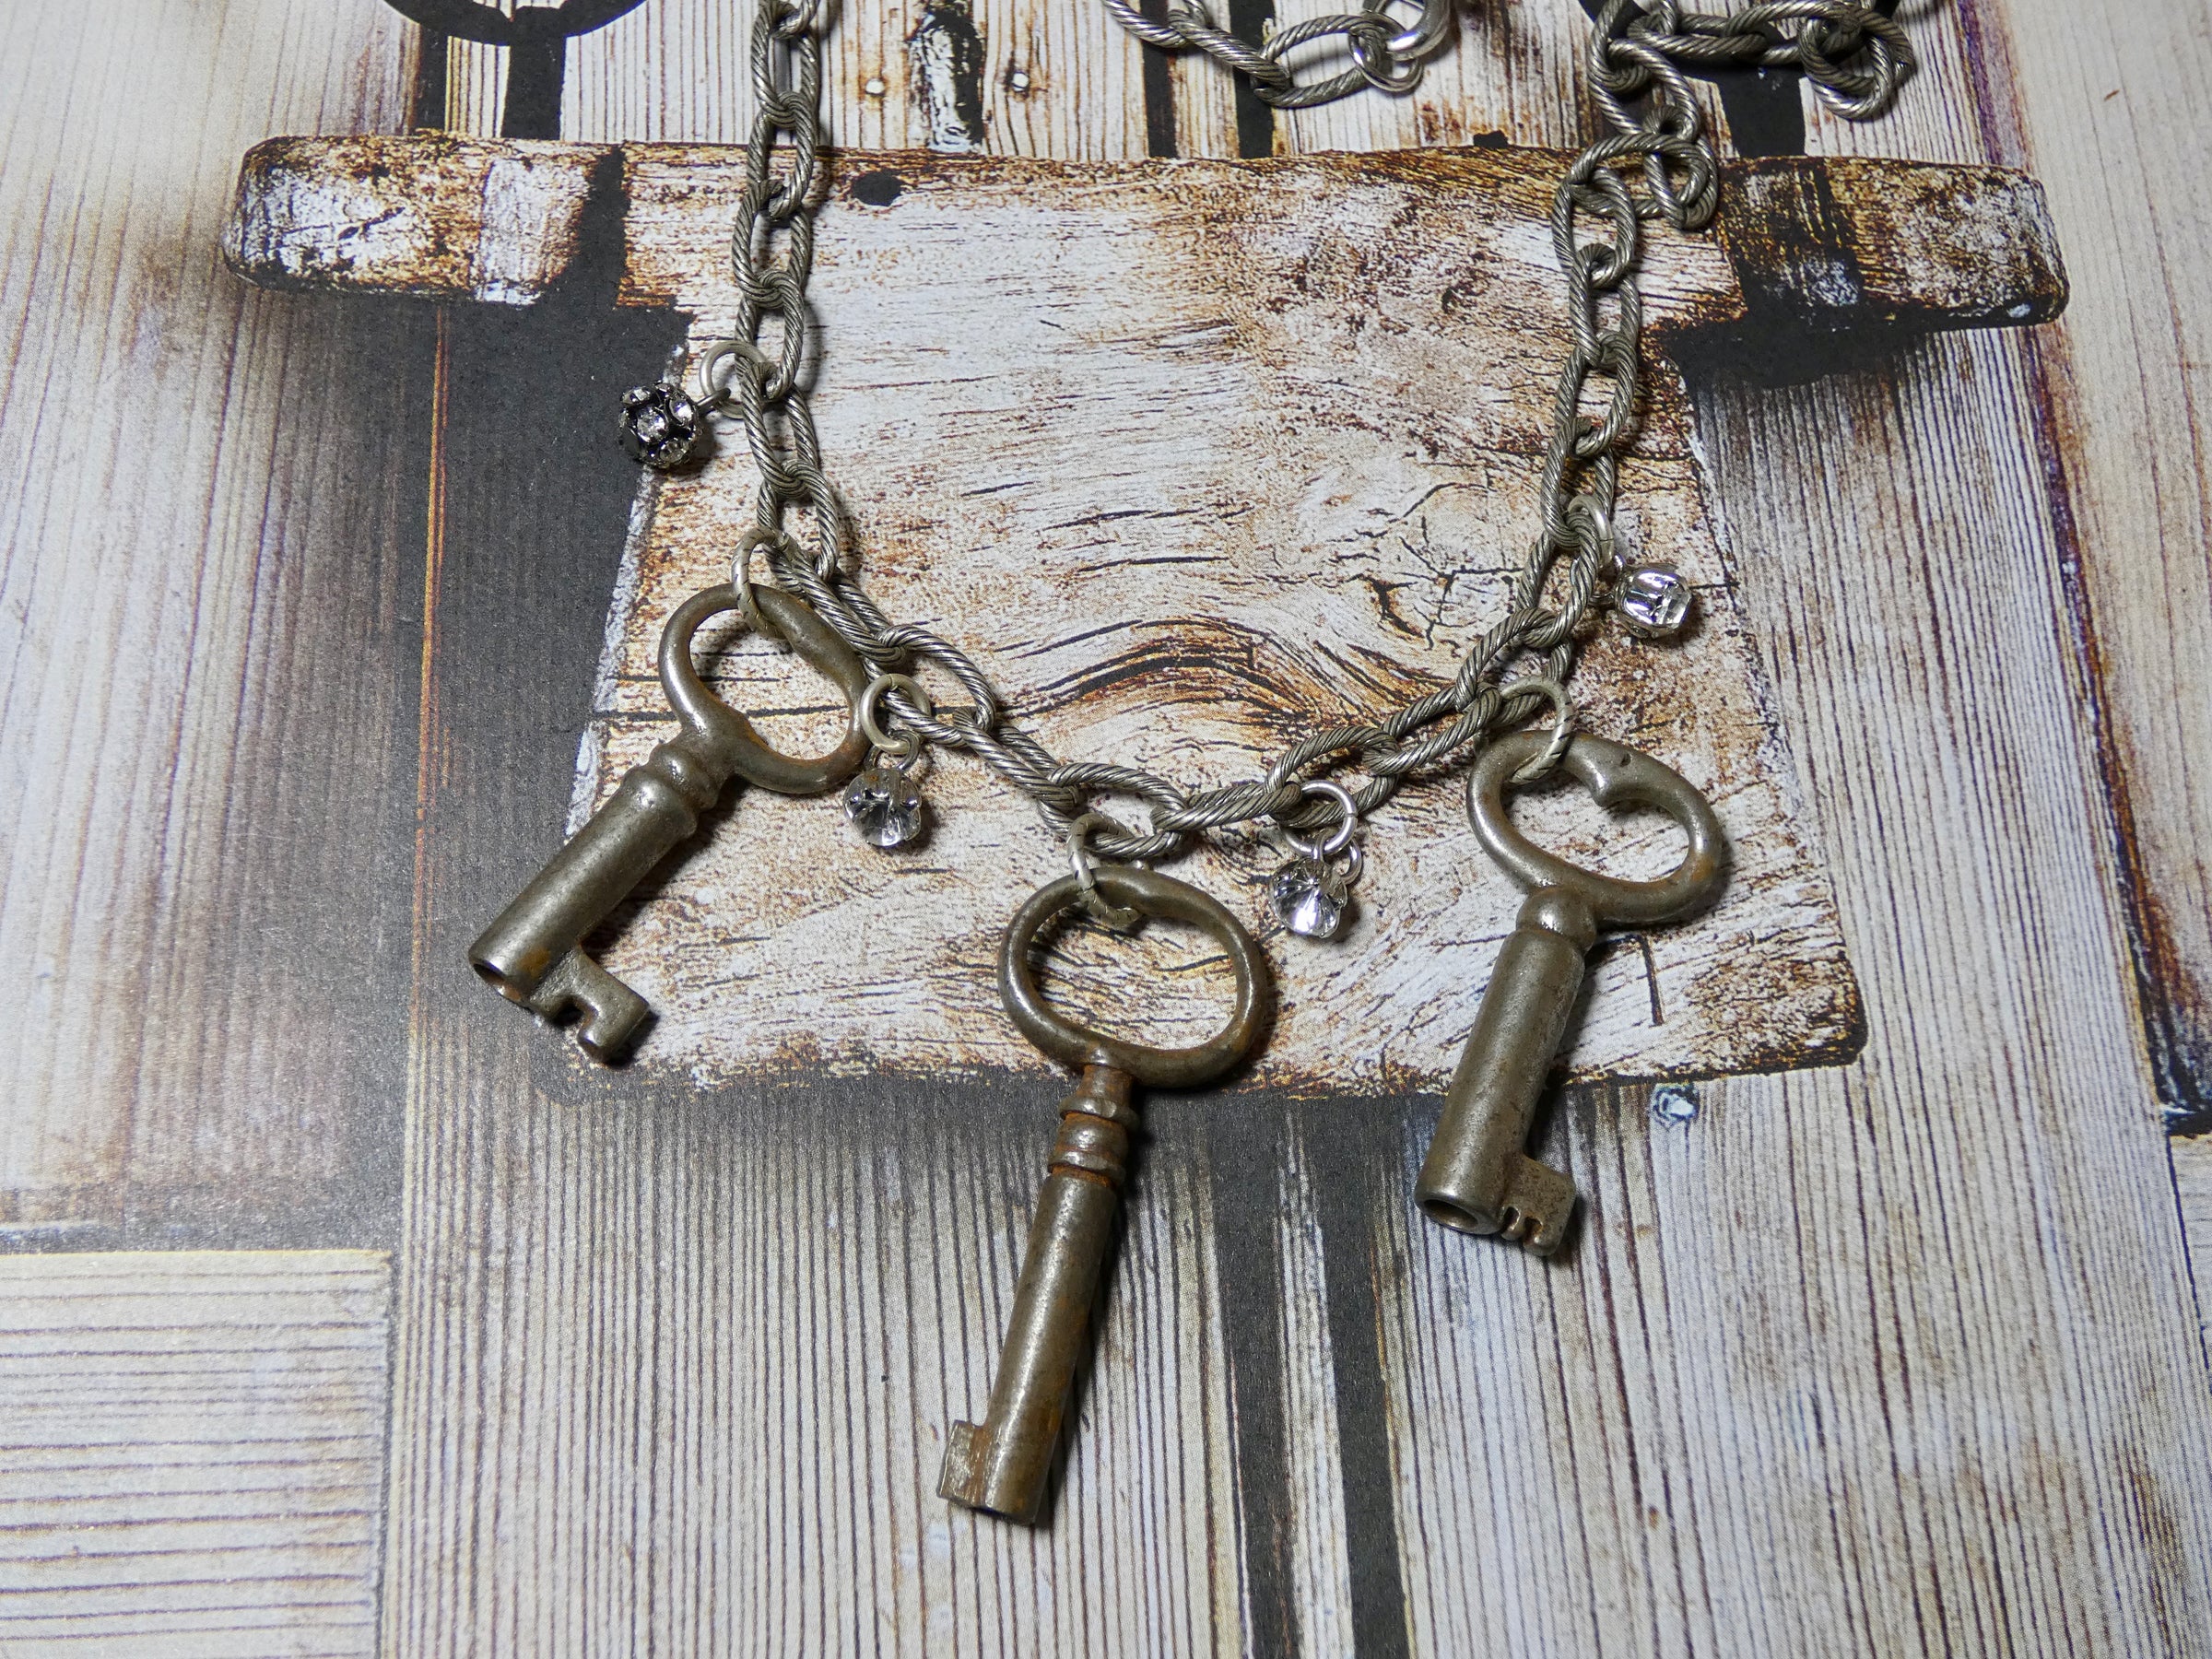 Skull Key and Lock Necklace Handmade in Sterling Silver With